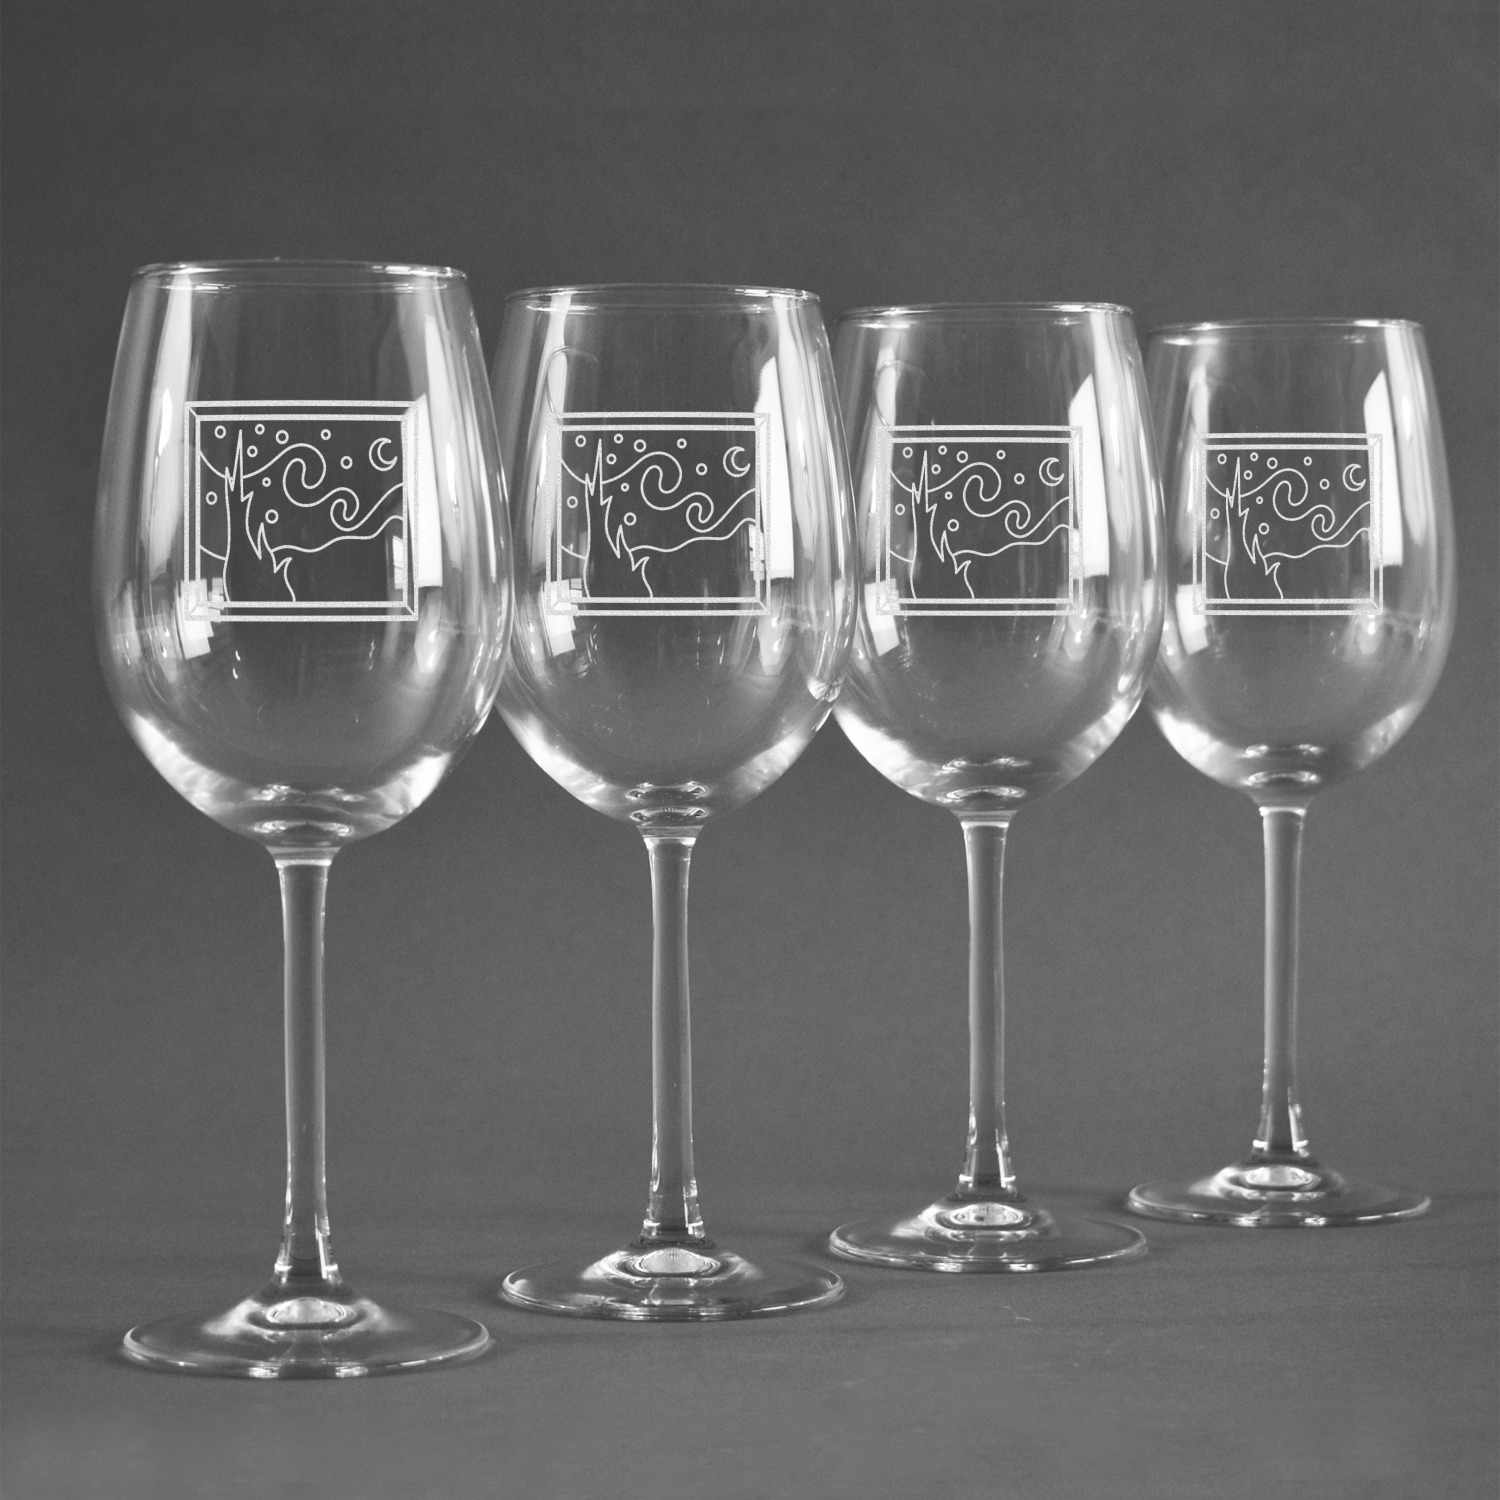 https://www.youcustomizeit.com/common/MAKE/673055/The-Starry-Night-Van-Gogh-1889-Personalized-Wine-Glasses-Set-of-4.jpg?lm=1682546219